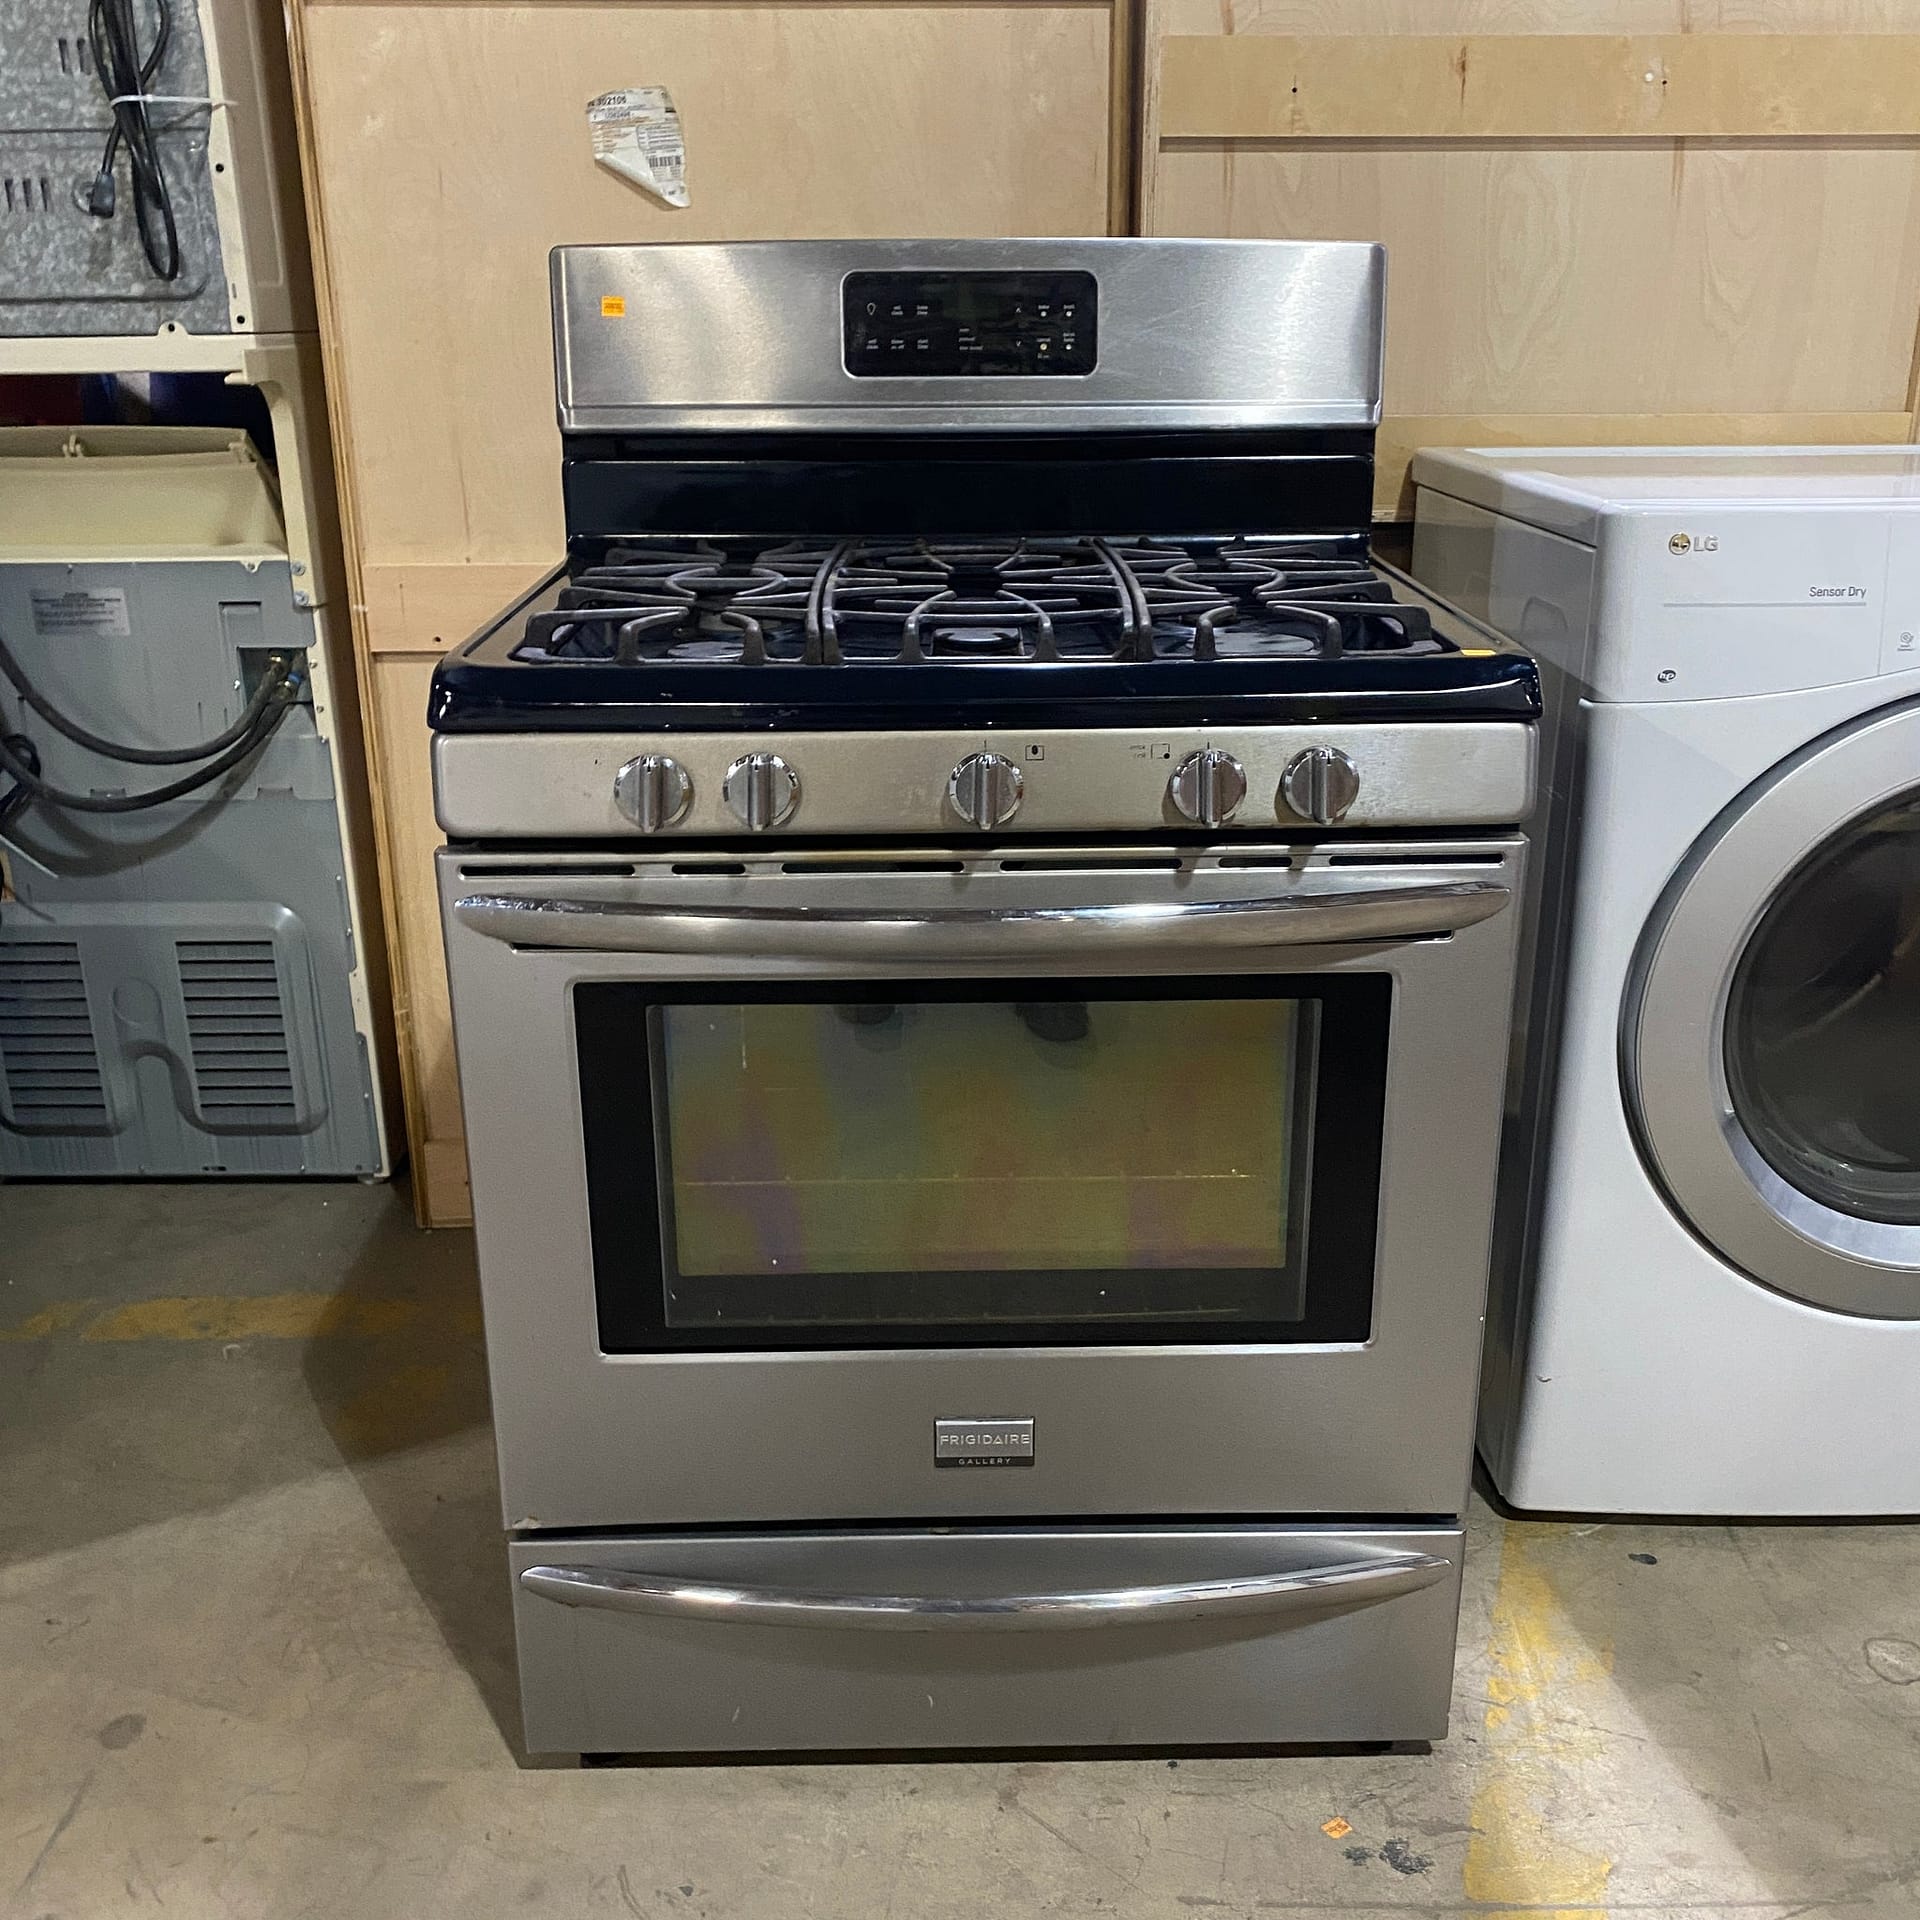 Frigidaire Stove Troubleshooting: Step-By-Step Guide